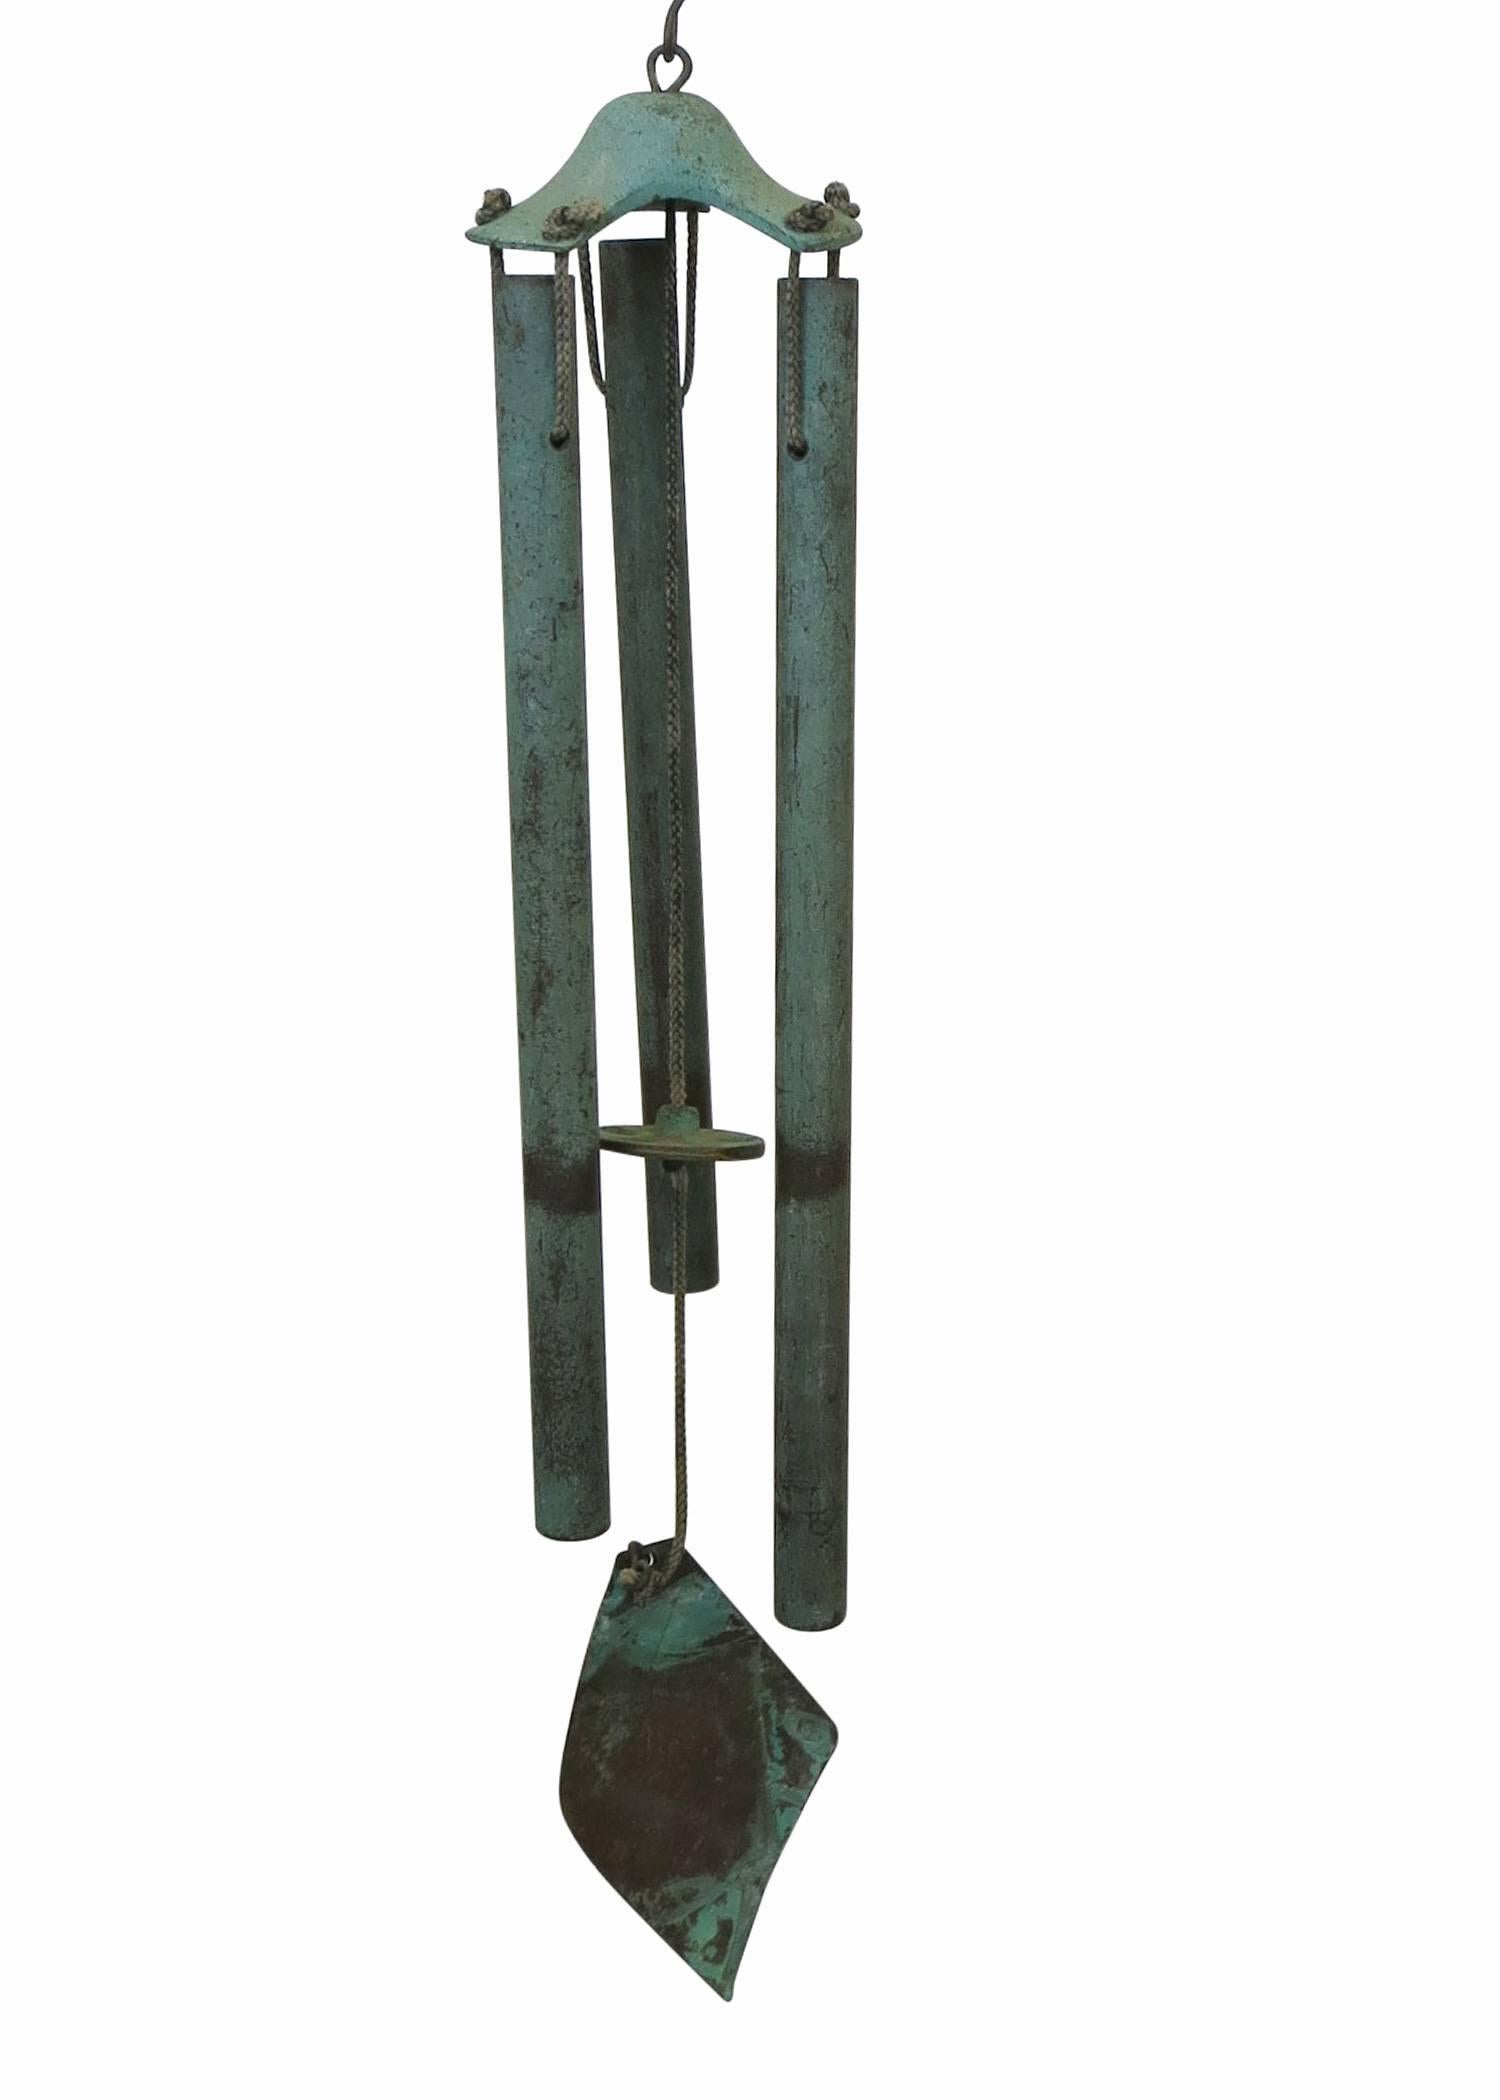 Walter Lamb Attributed Modernist Bronze Tubing and Sheet Bronze Wind Chimes with a sound similar to church bells. From the beaches of Hawaii Walter Lamb created wonderful Furniture and Accessories in the 1950s and 1960s.

Set of two

Smallest: